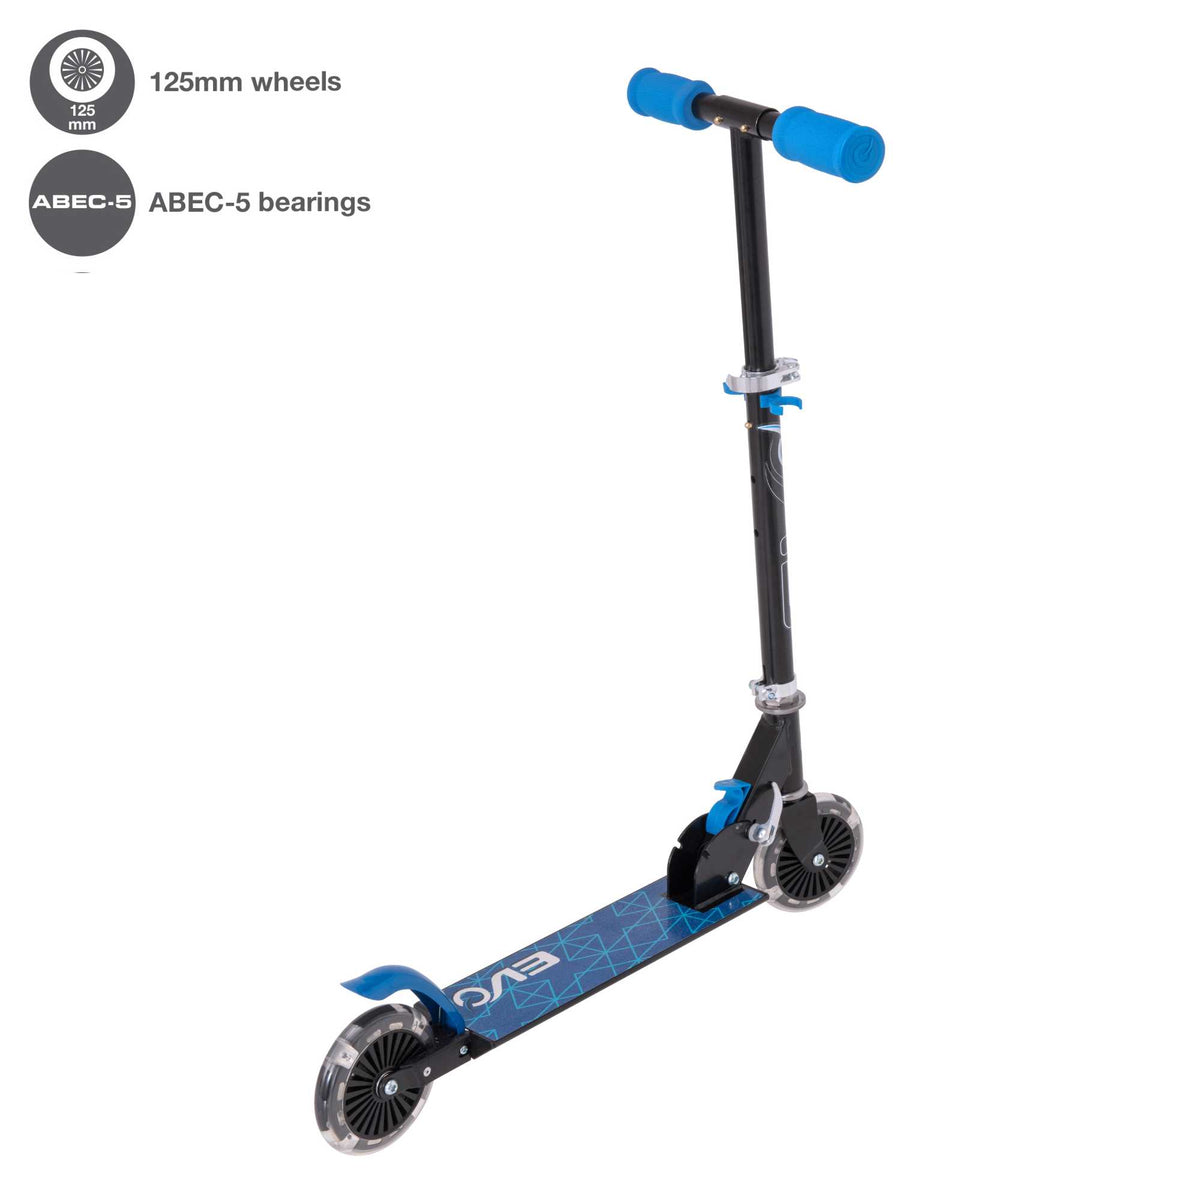 EVO Childrens Light Up Inline Scooter | BlueInline Scooter, Light Up Scooter, Scooter For 5 Year Olds, Push Scooter, Two Wheeled Scooter, Folding Scooter